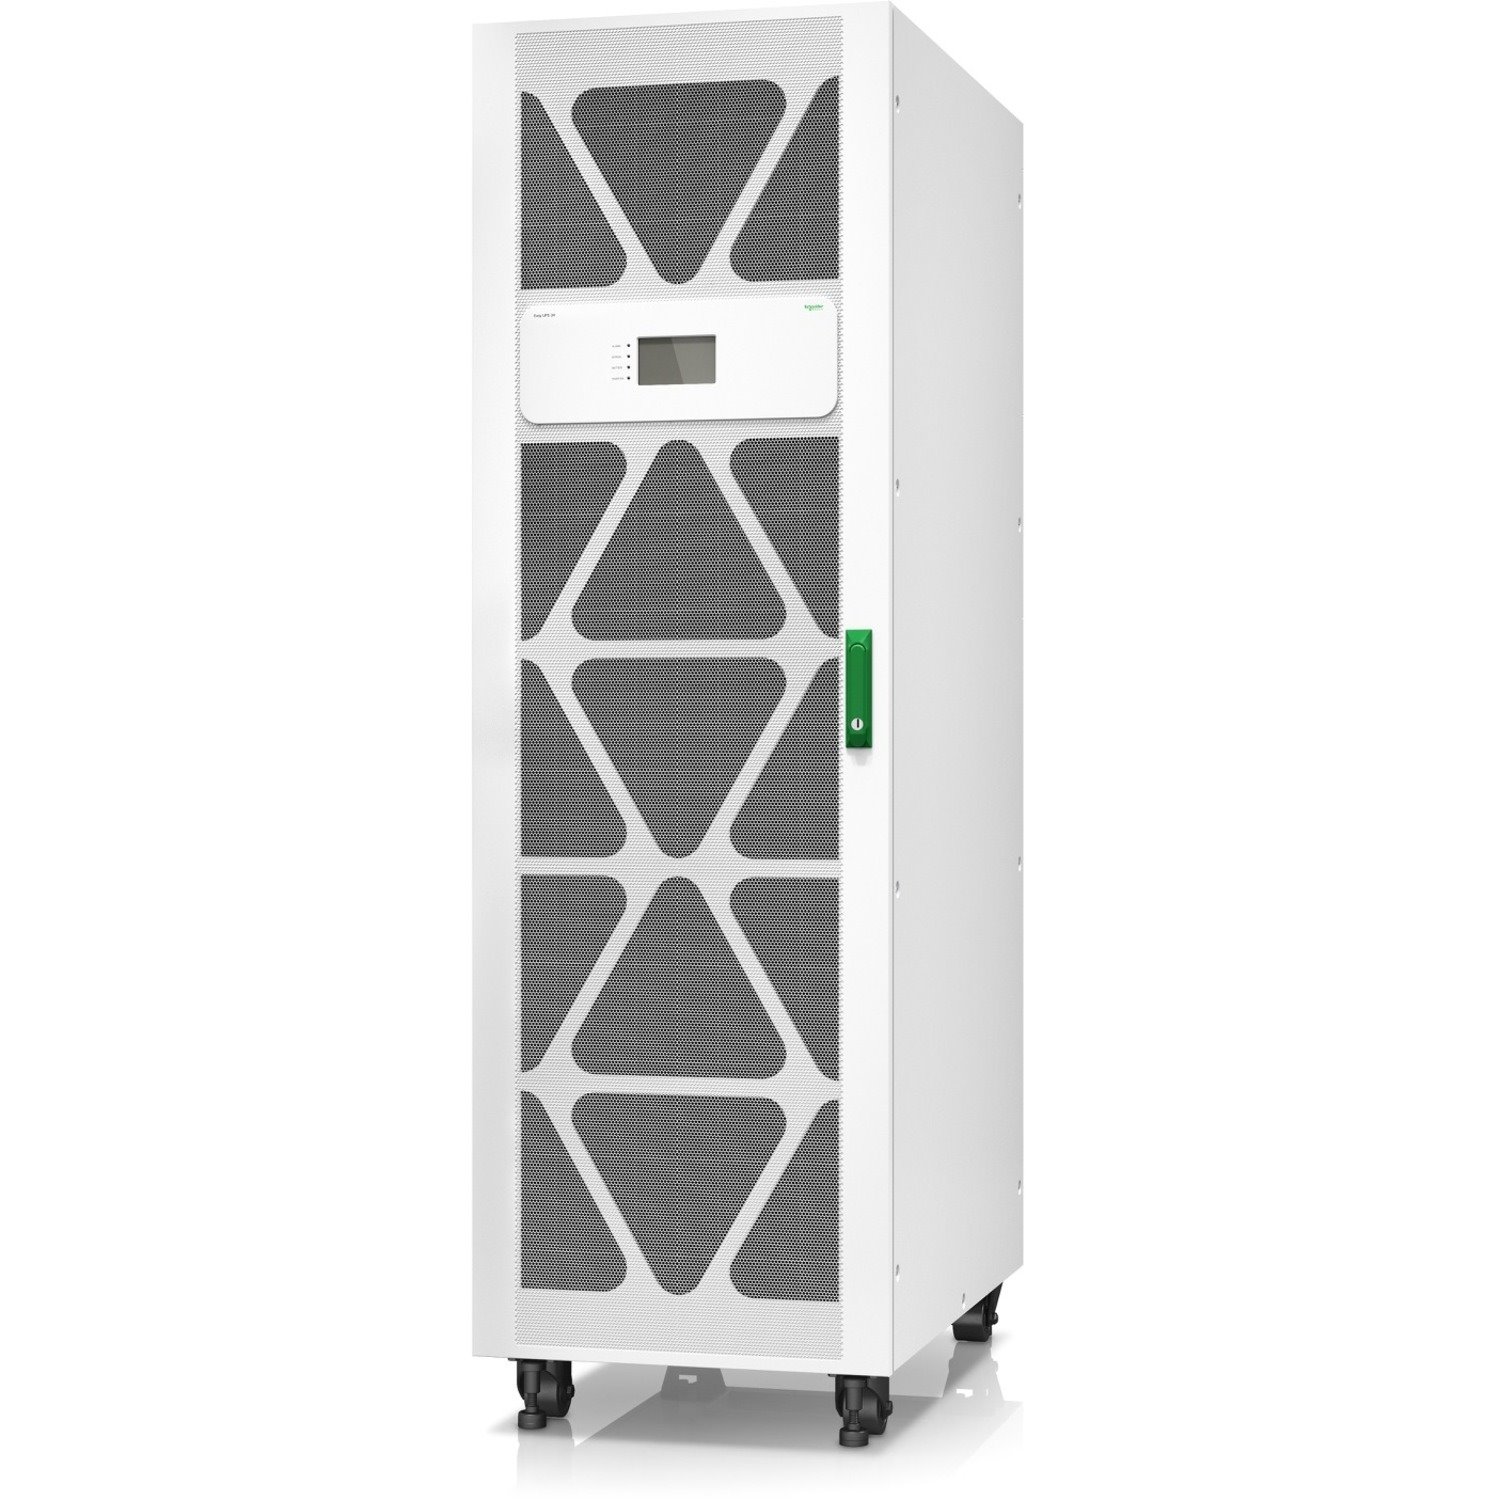 APC by Schneider Electric Easy UPS 3M Double Conversion Online UPS - 80 kVA - Three Phase